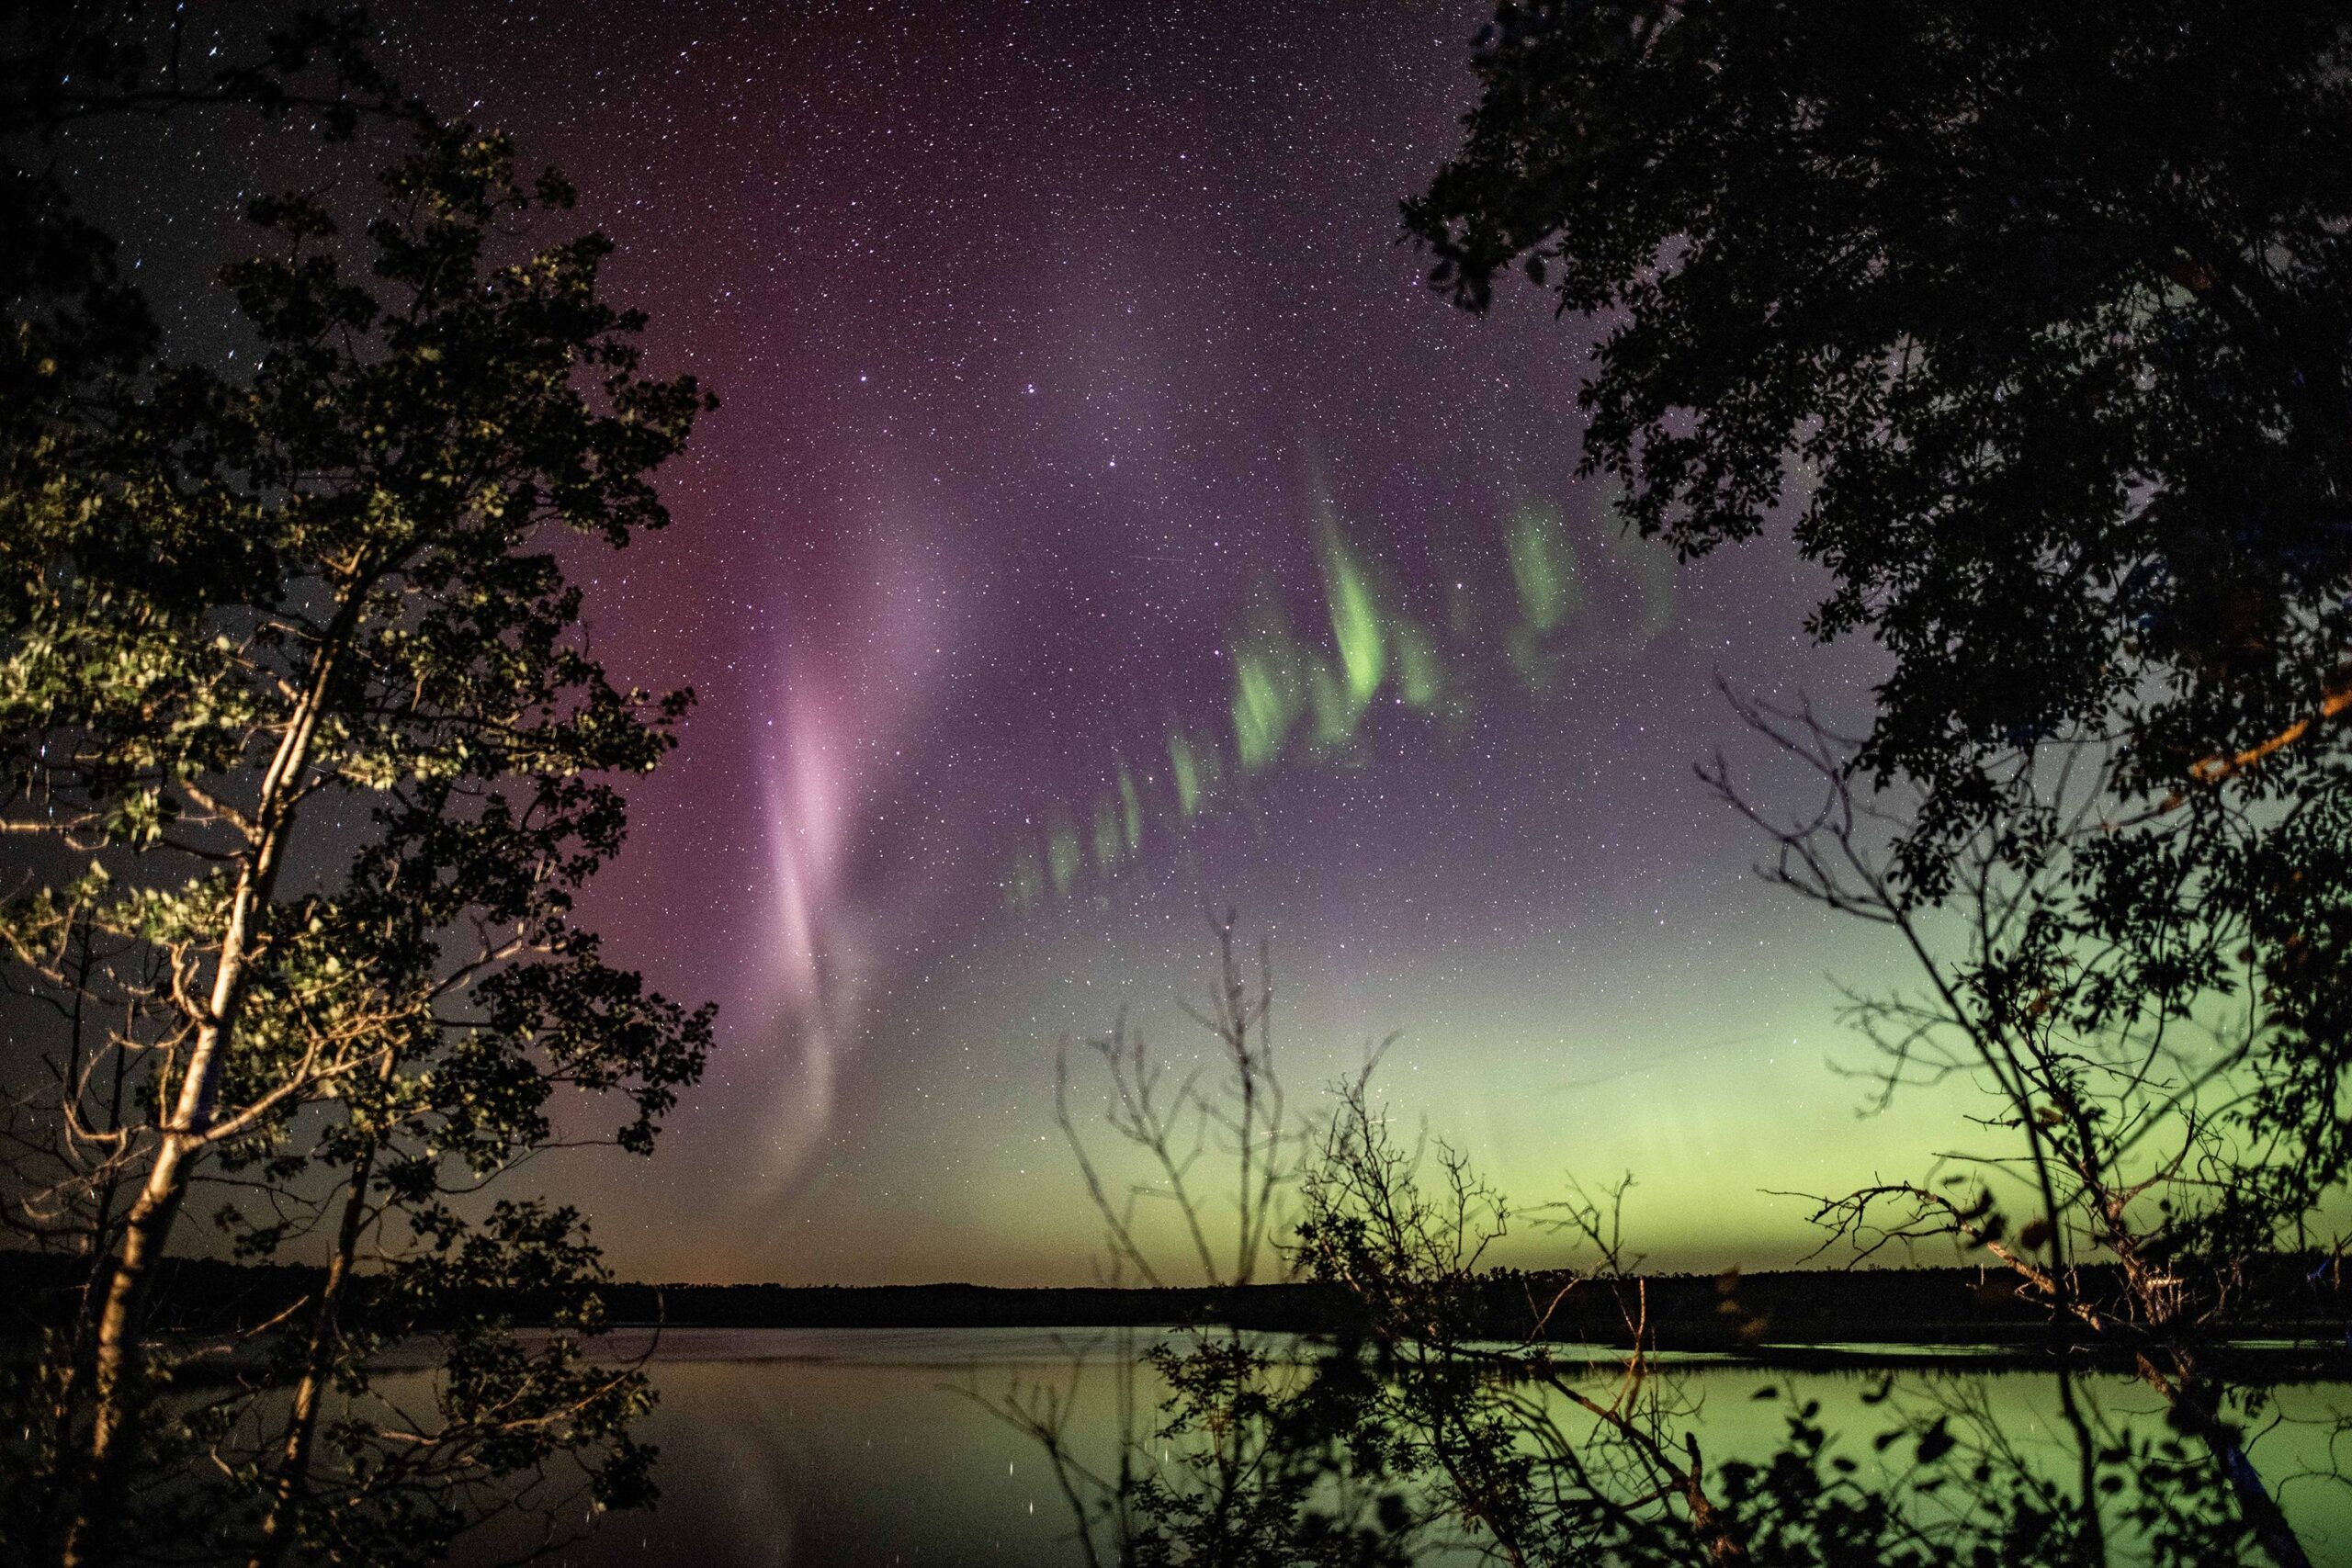 An image of the Steve phenomenon captured by Canadian photographer Neil Zeller.
(Credit: Courtesy N...